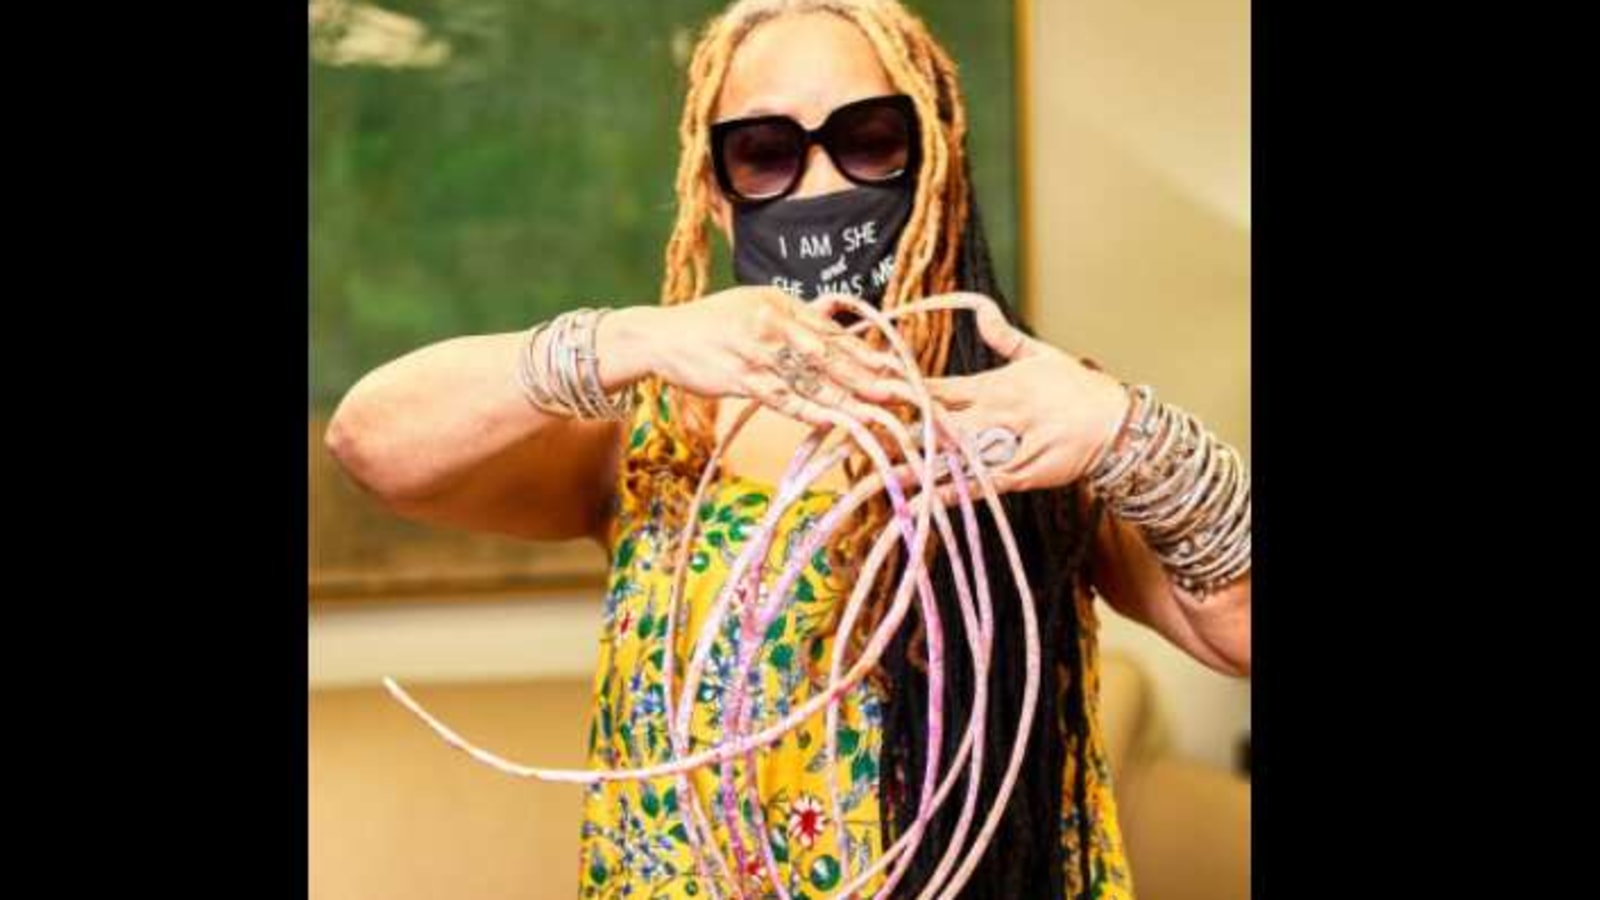 Indian man with world's longest fingernails set to cut them after 66 years  | Trending News - The Indian Express